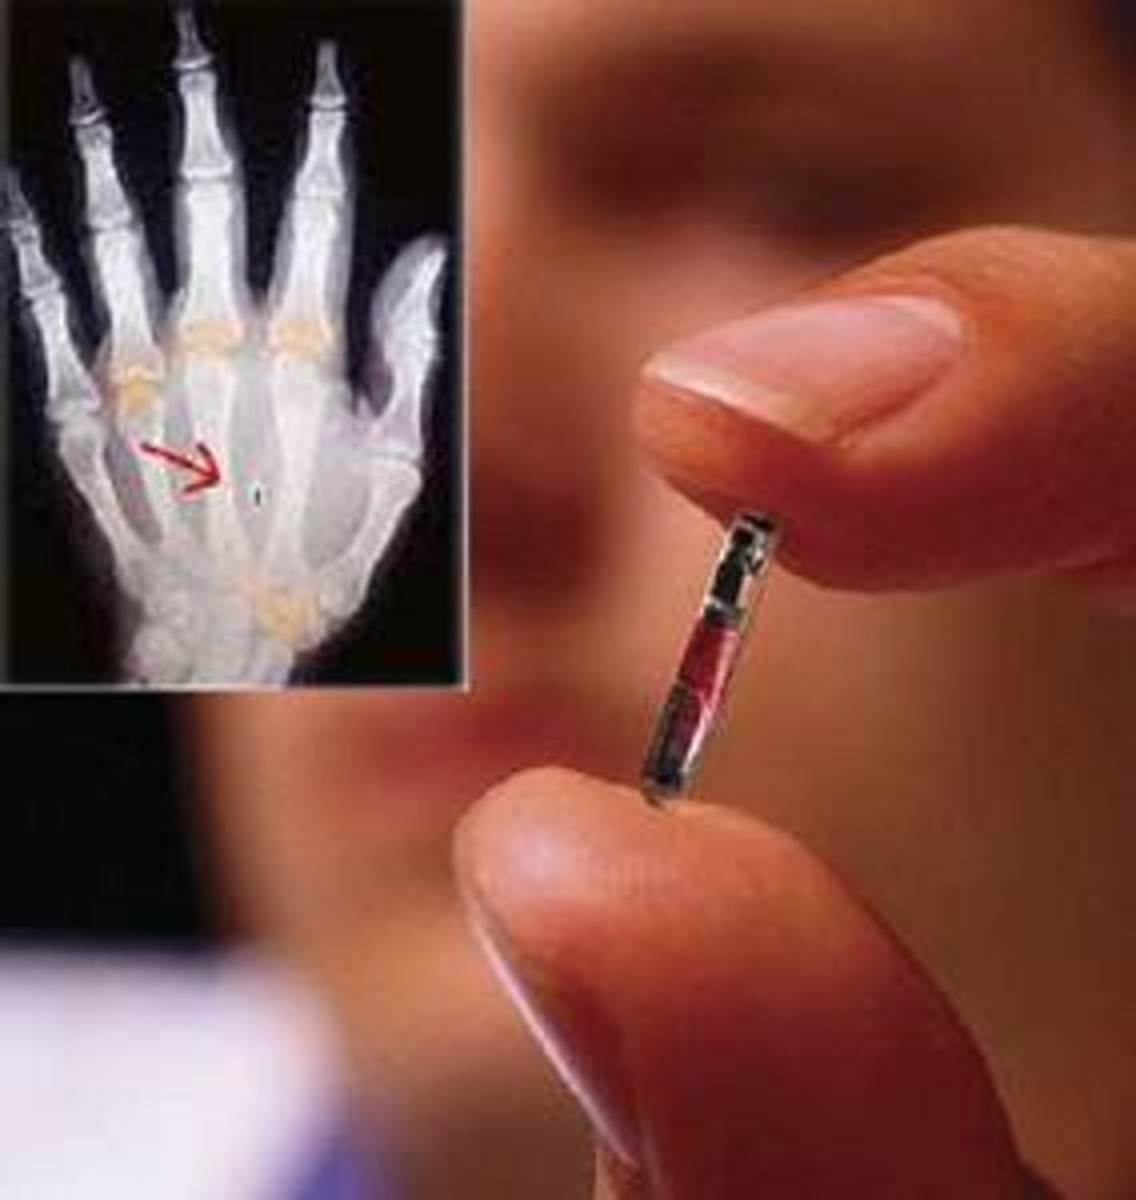 Radio Frequency Control Chip Under Your Skin